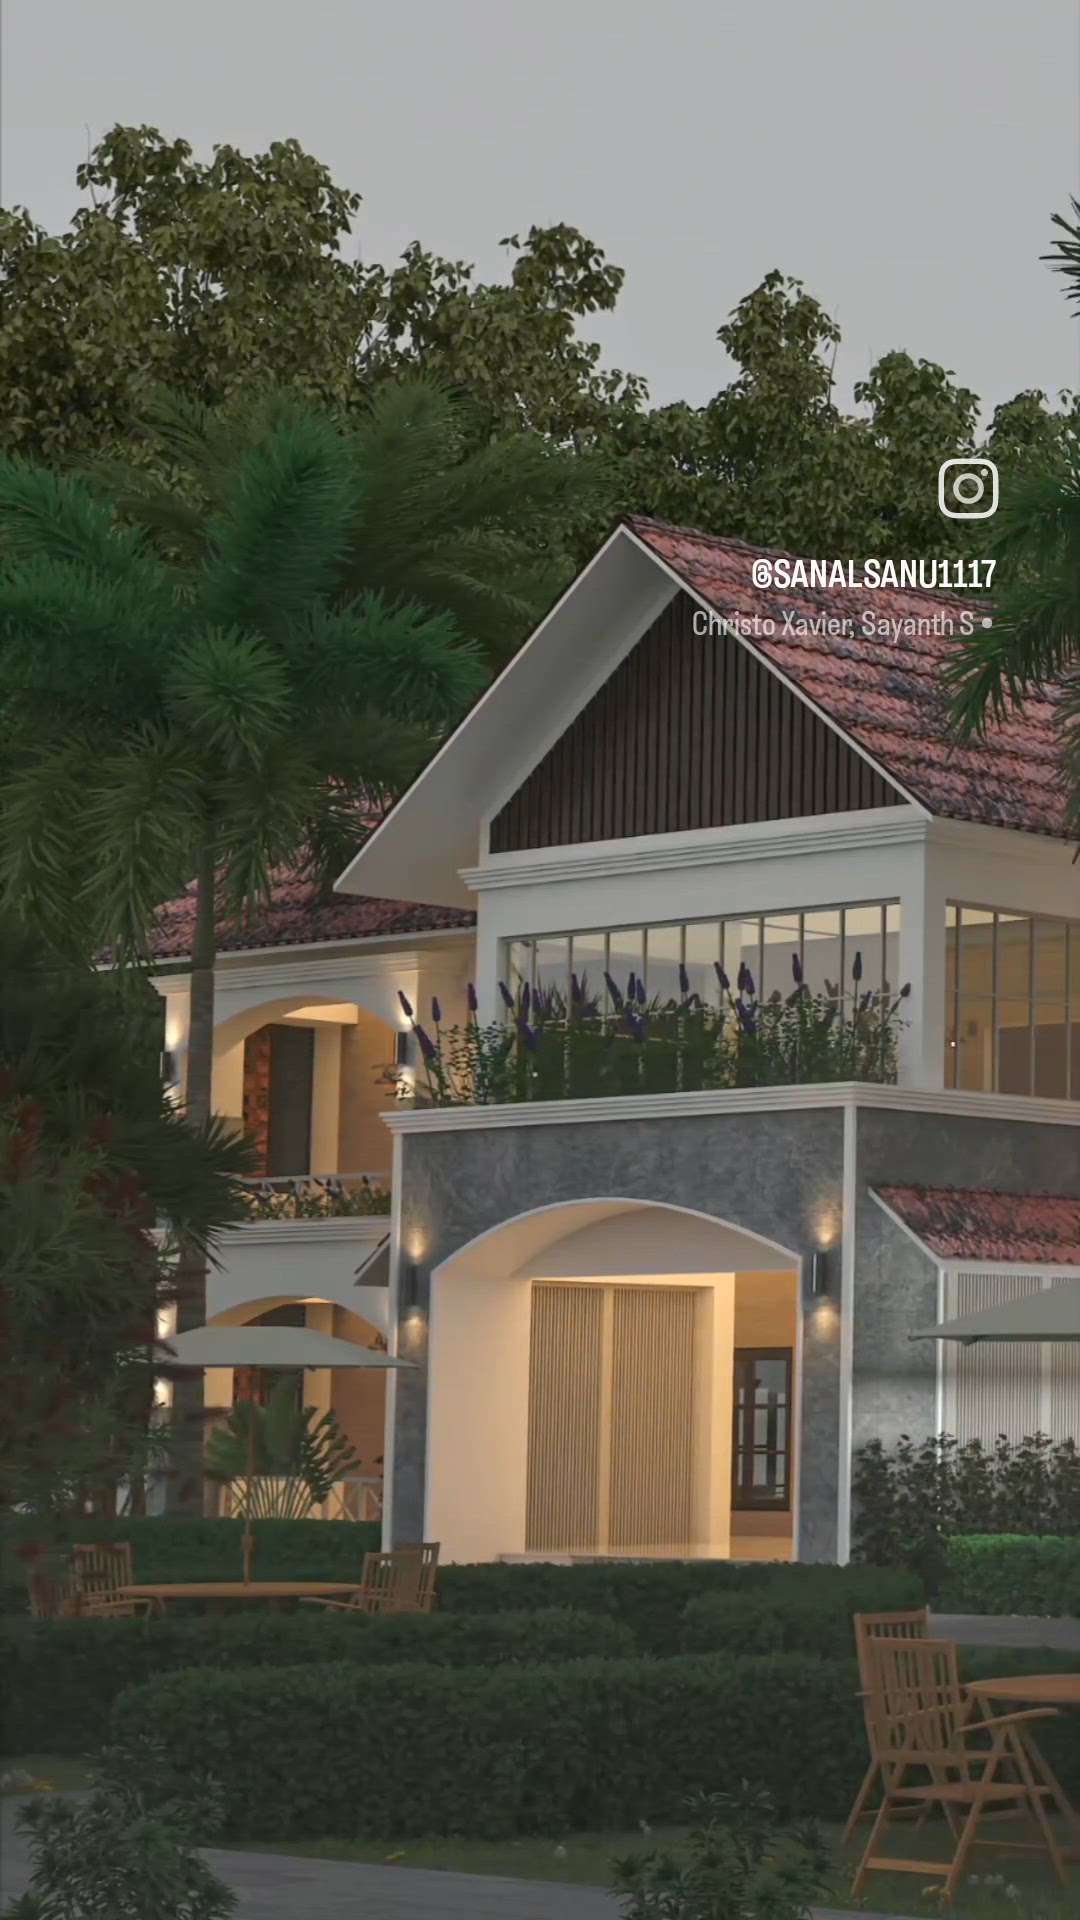 We Provide........ 
CONSTRUCTION 
3D Elevation
3D interior
3D Plan
3D Landscapeing
2D Plan
Plan Approval
Completion Drawing
General Drawings 

Contact Us By 9539215017....
#3dvisualization
#3drender
#elevation
#homedesign
#keralahome
#contumprary home
#home design
#home interior
#dinning interior